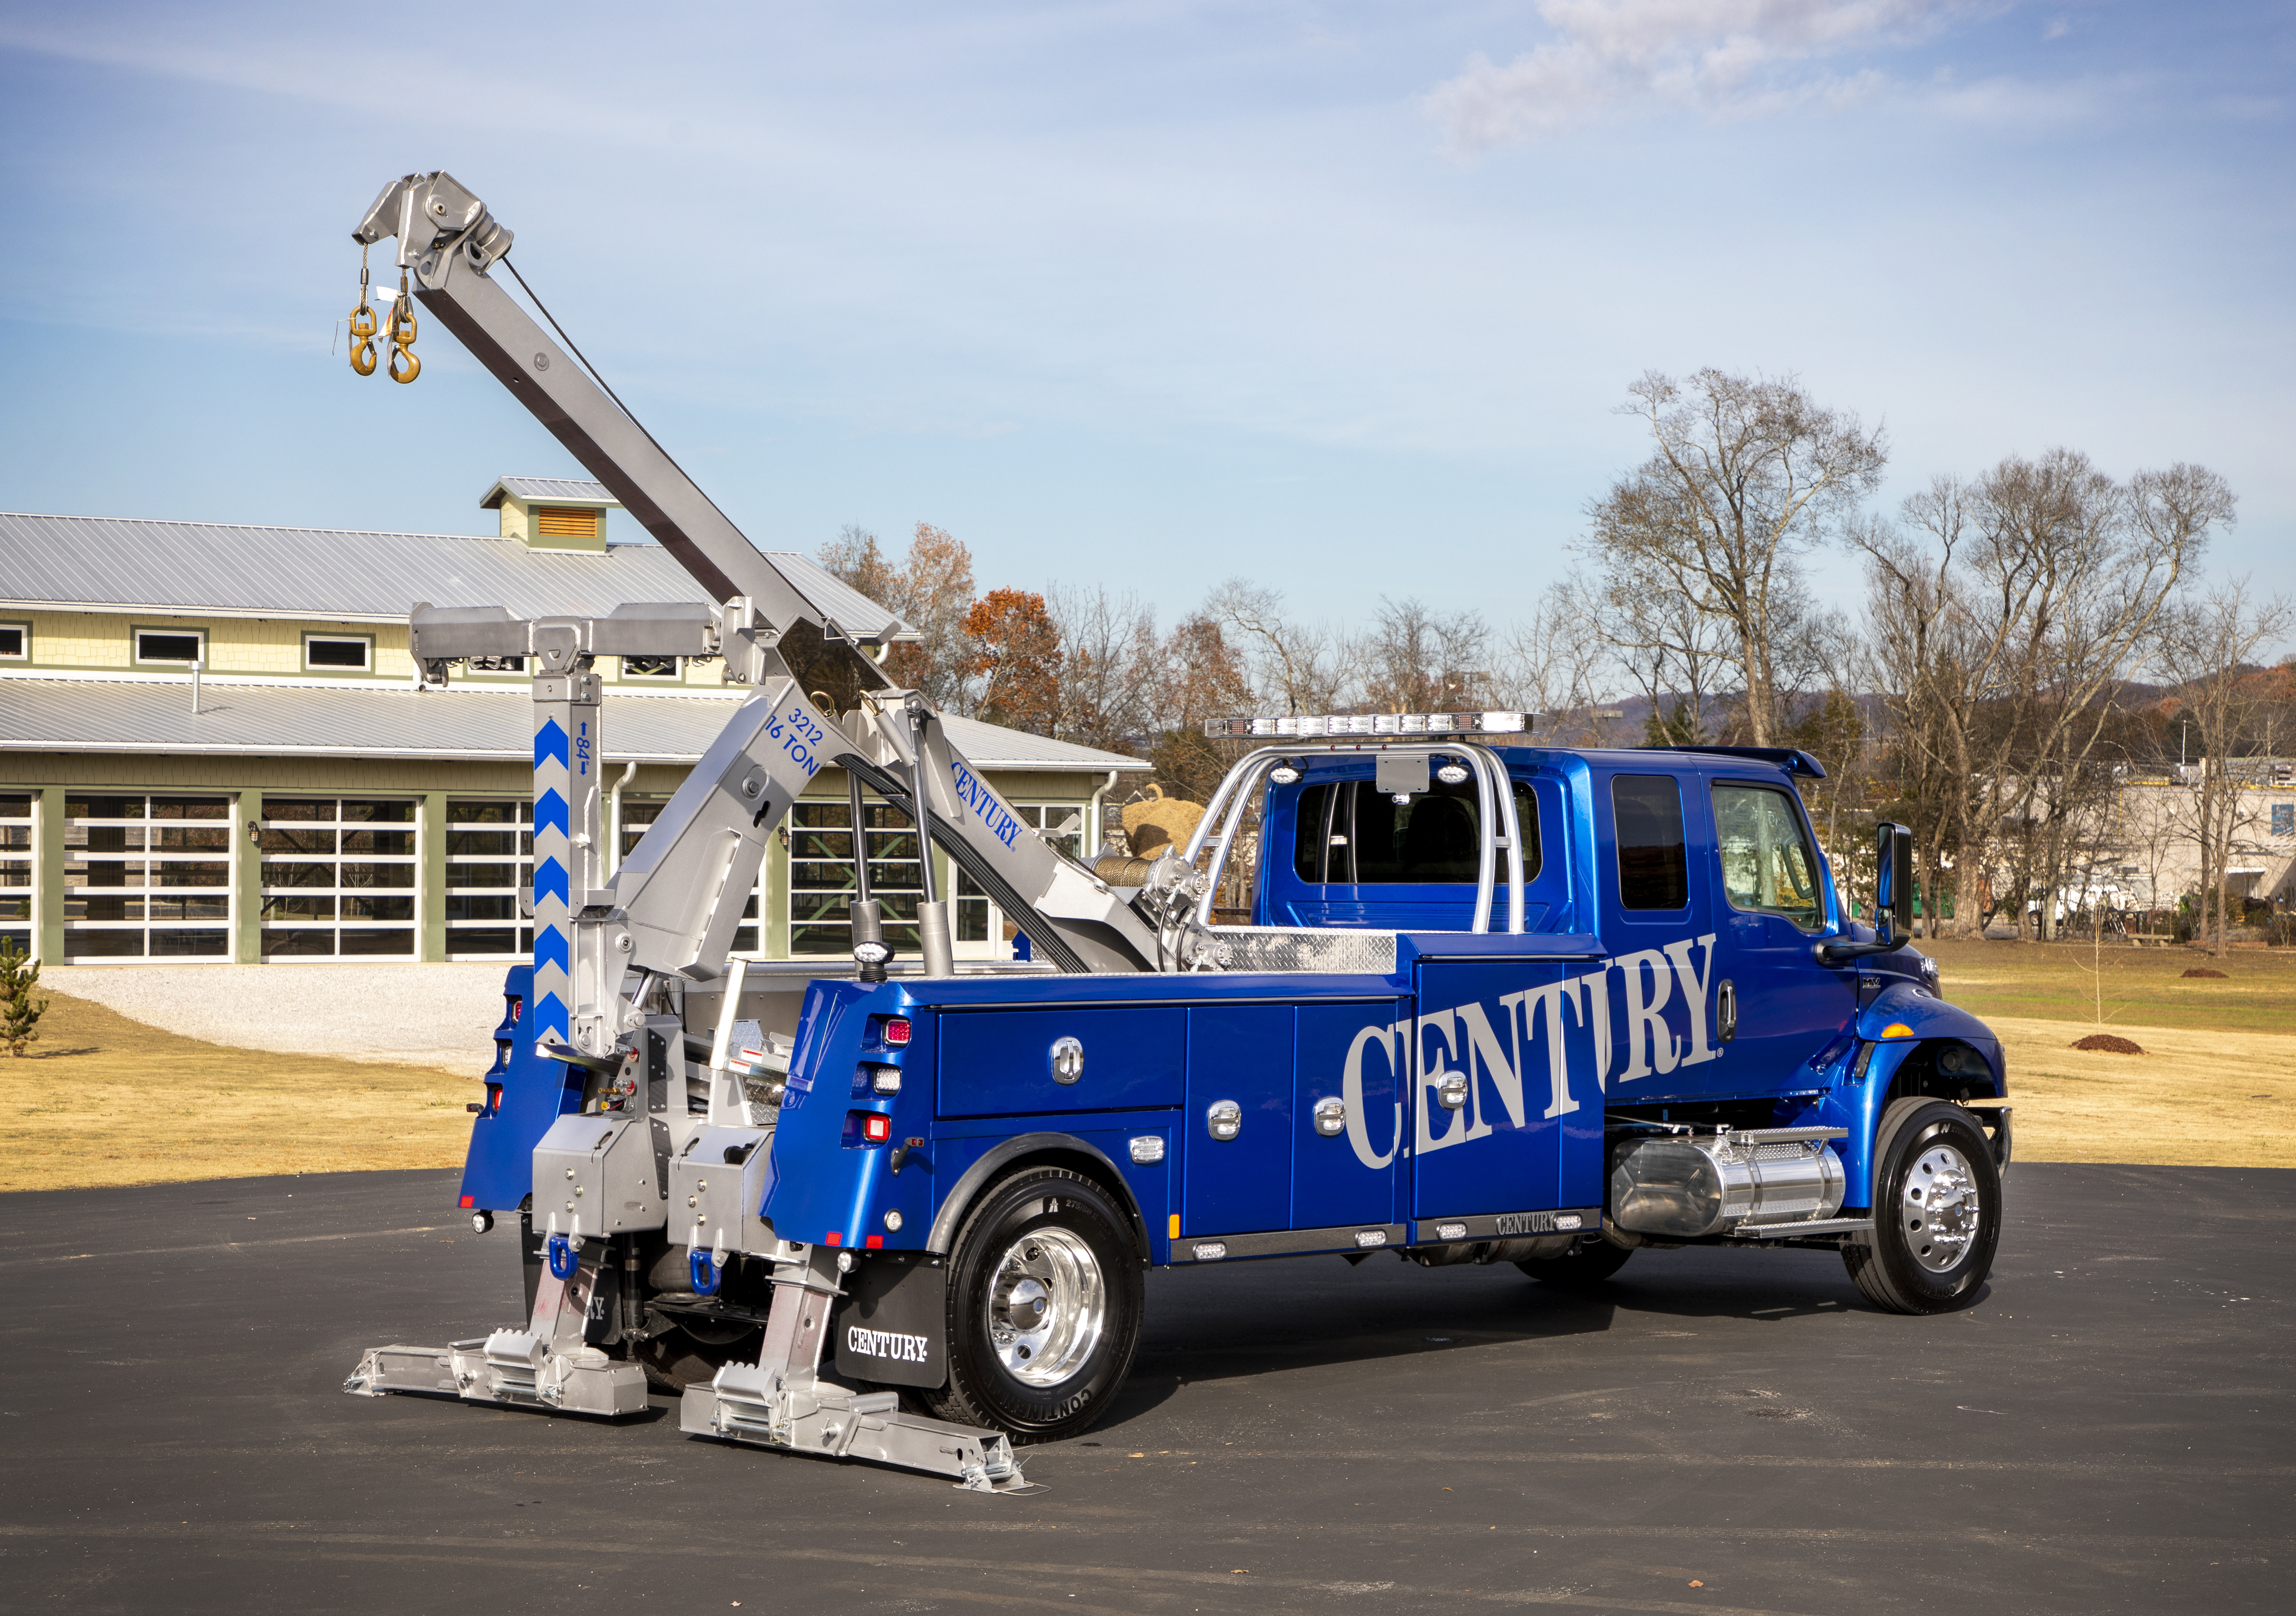 Century 3212 16-Ton Wrecker with a hydraulic extendable recovery boom